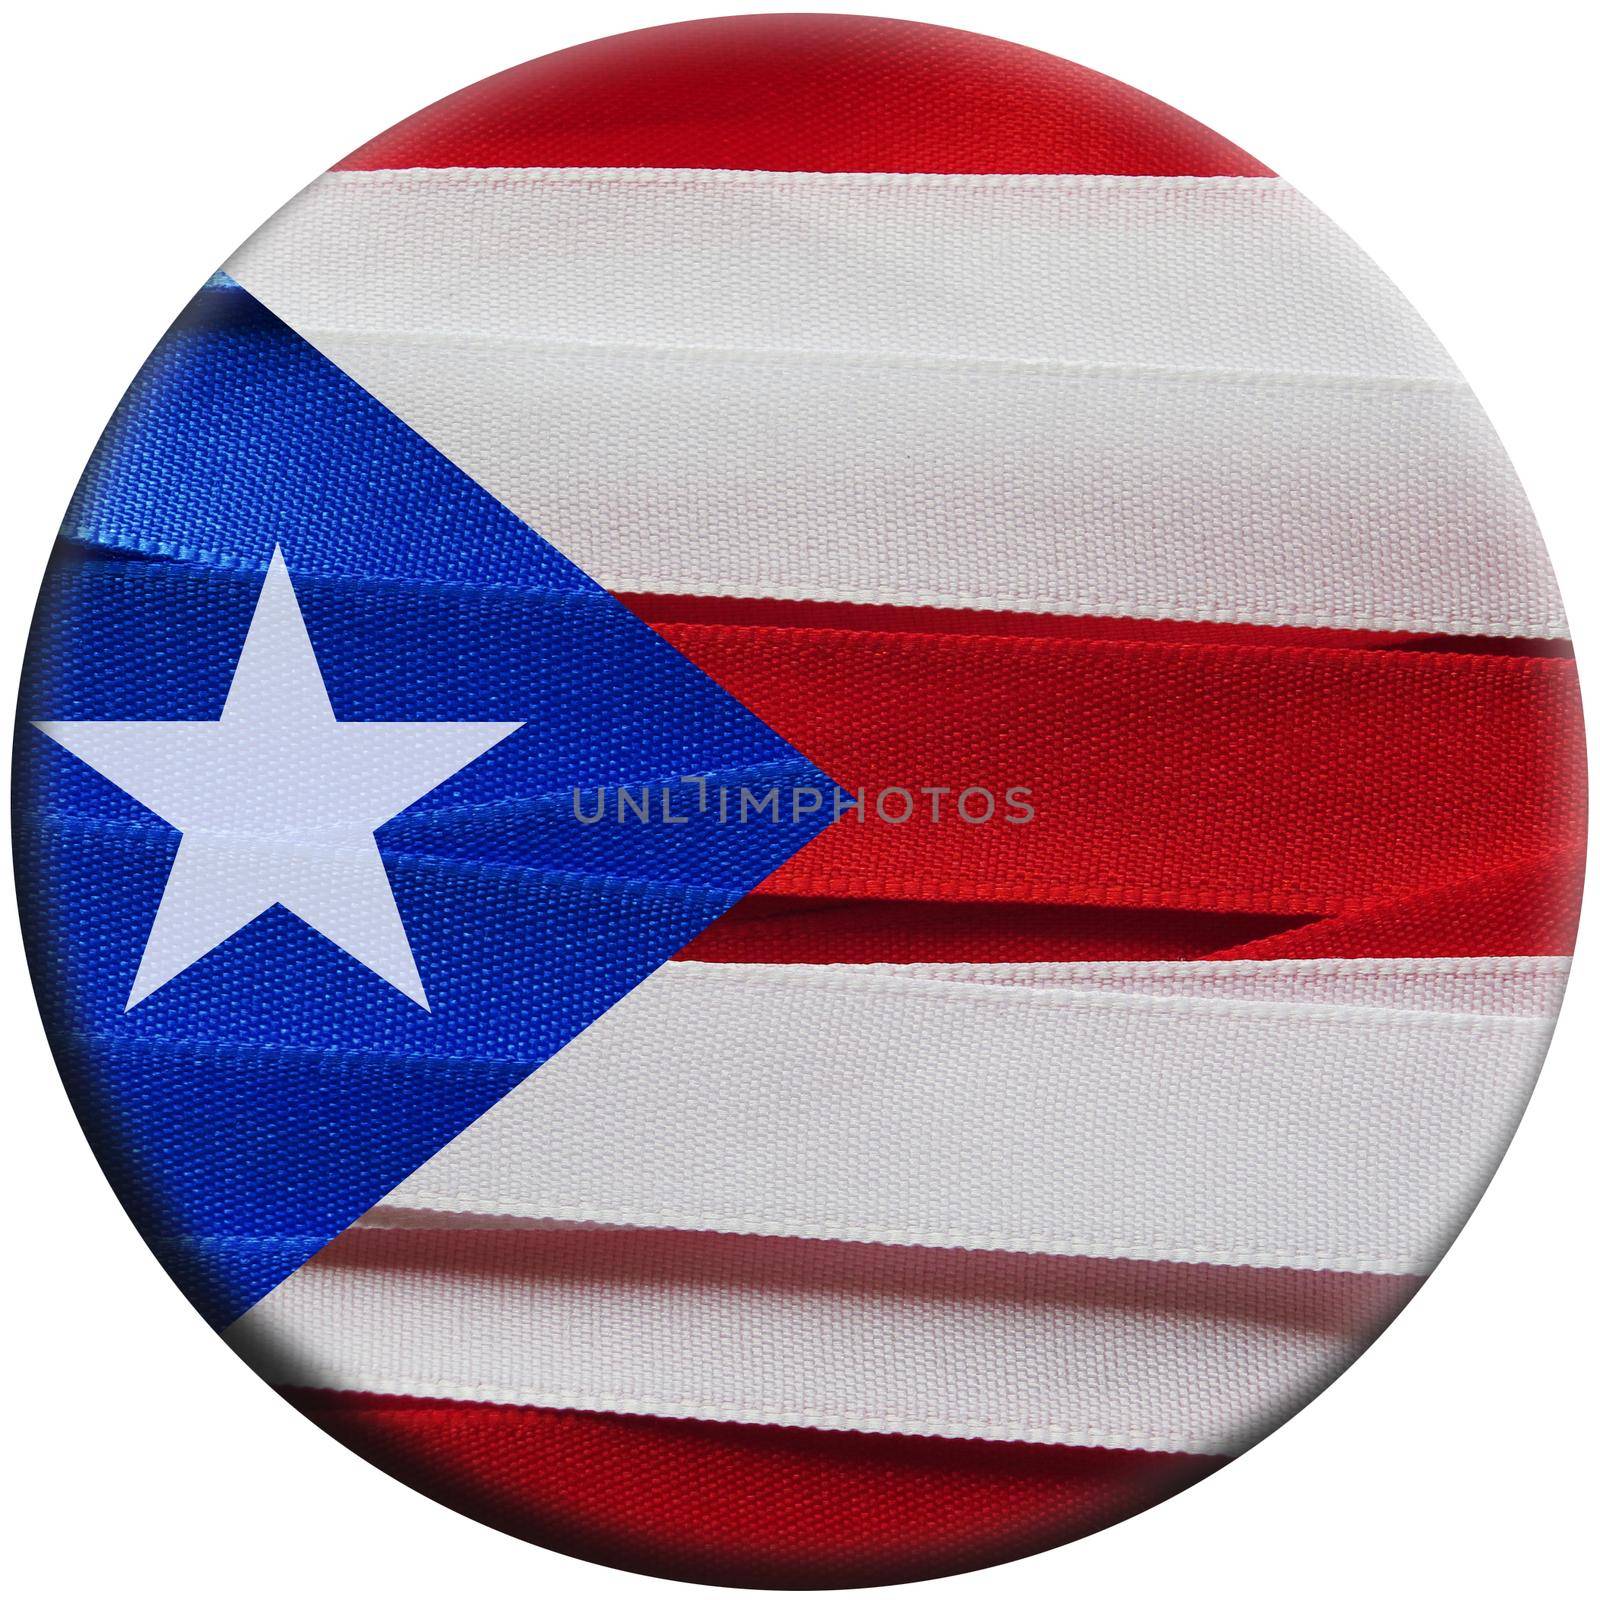 Puerto Rico flag or banner by aroas